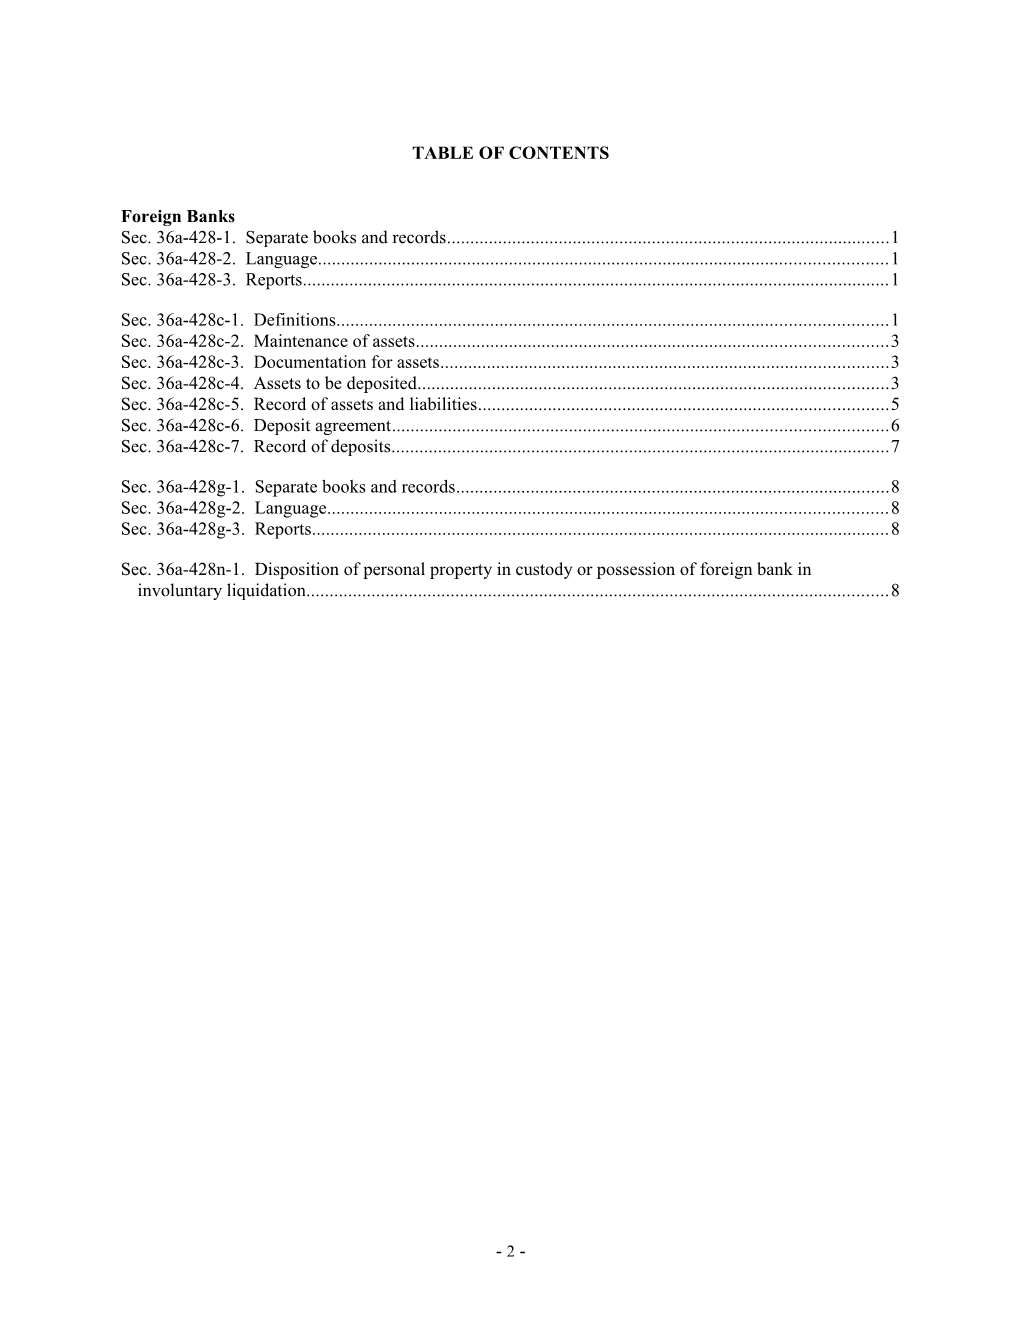 Regulations of Connecticut State Agencies s1